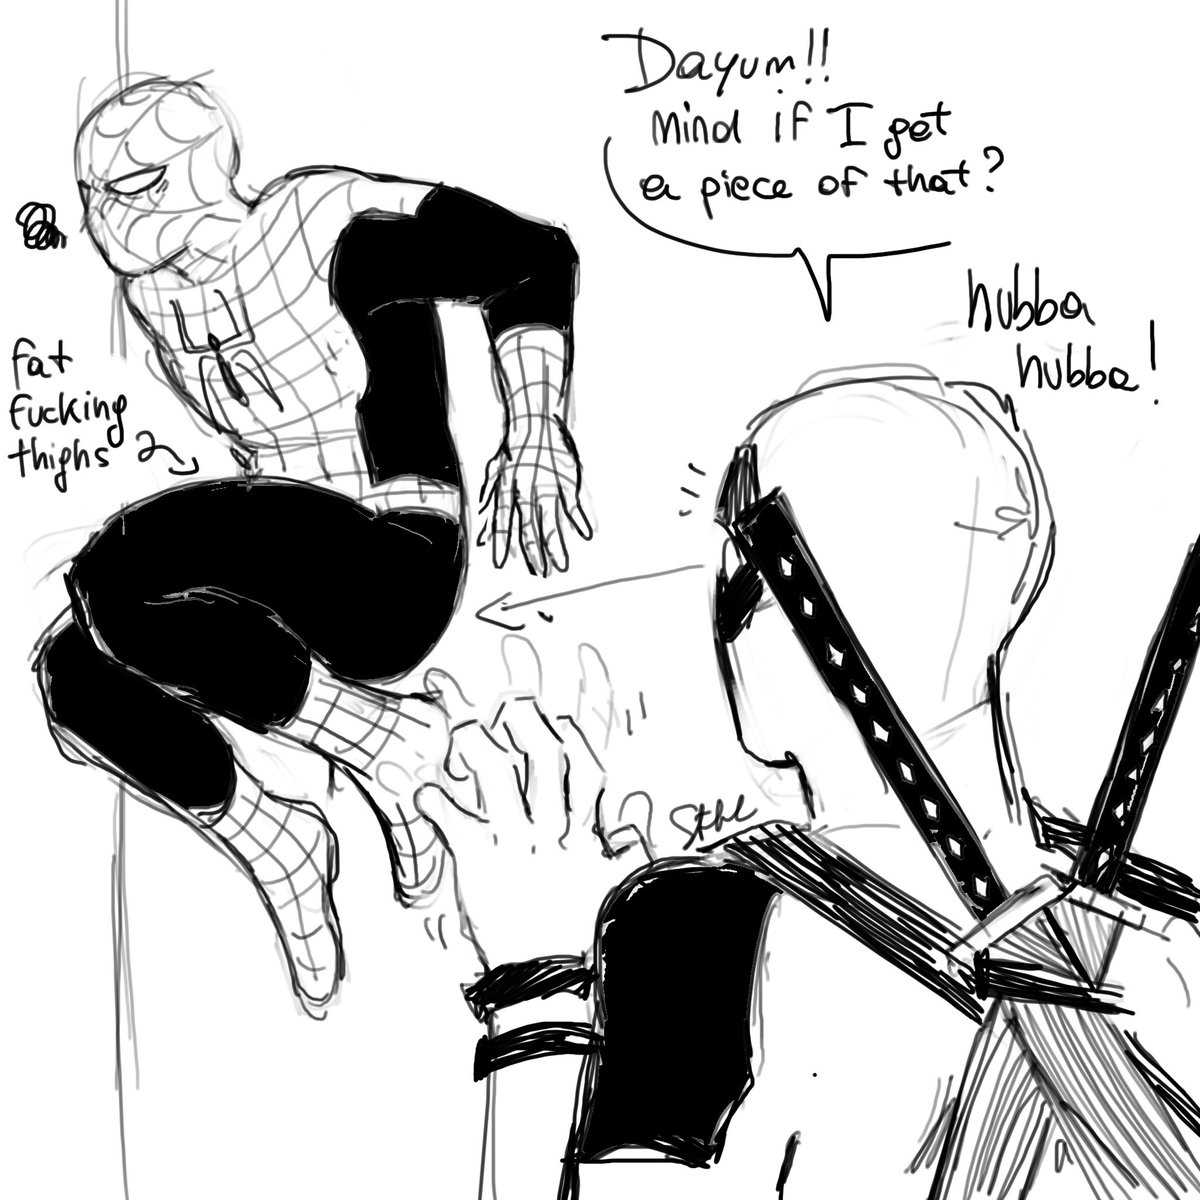 the sexual tension must be crazy

#joecooper #dougremer #cremernation #BASEketball #spideypool